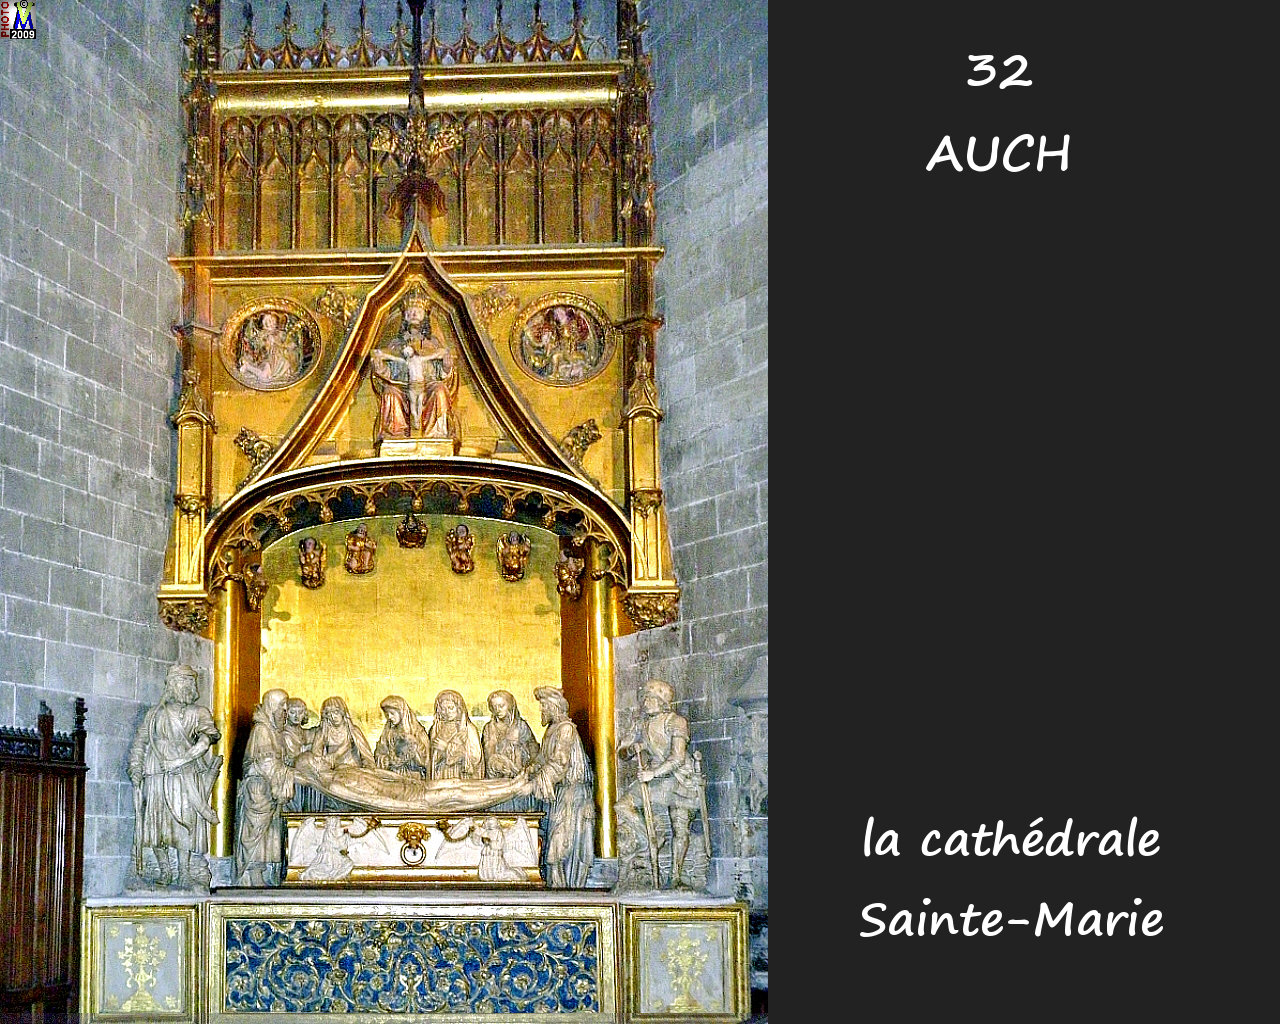 32AUCH_cathedrale_242.jpg